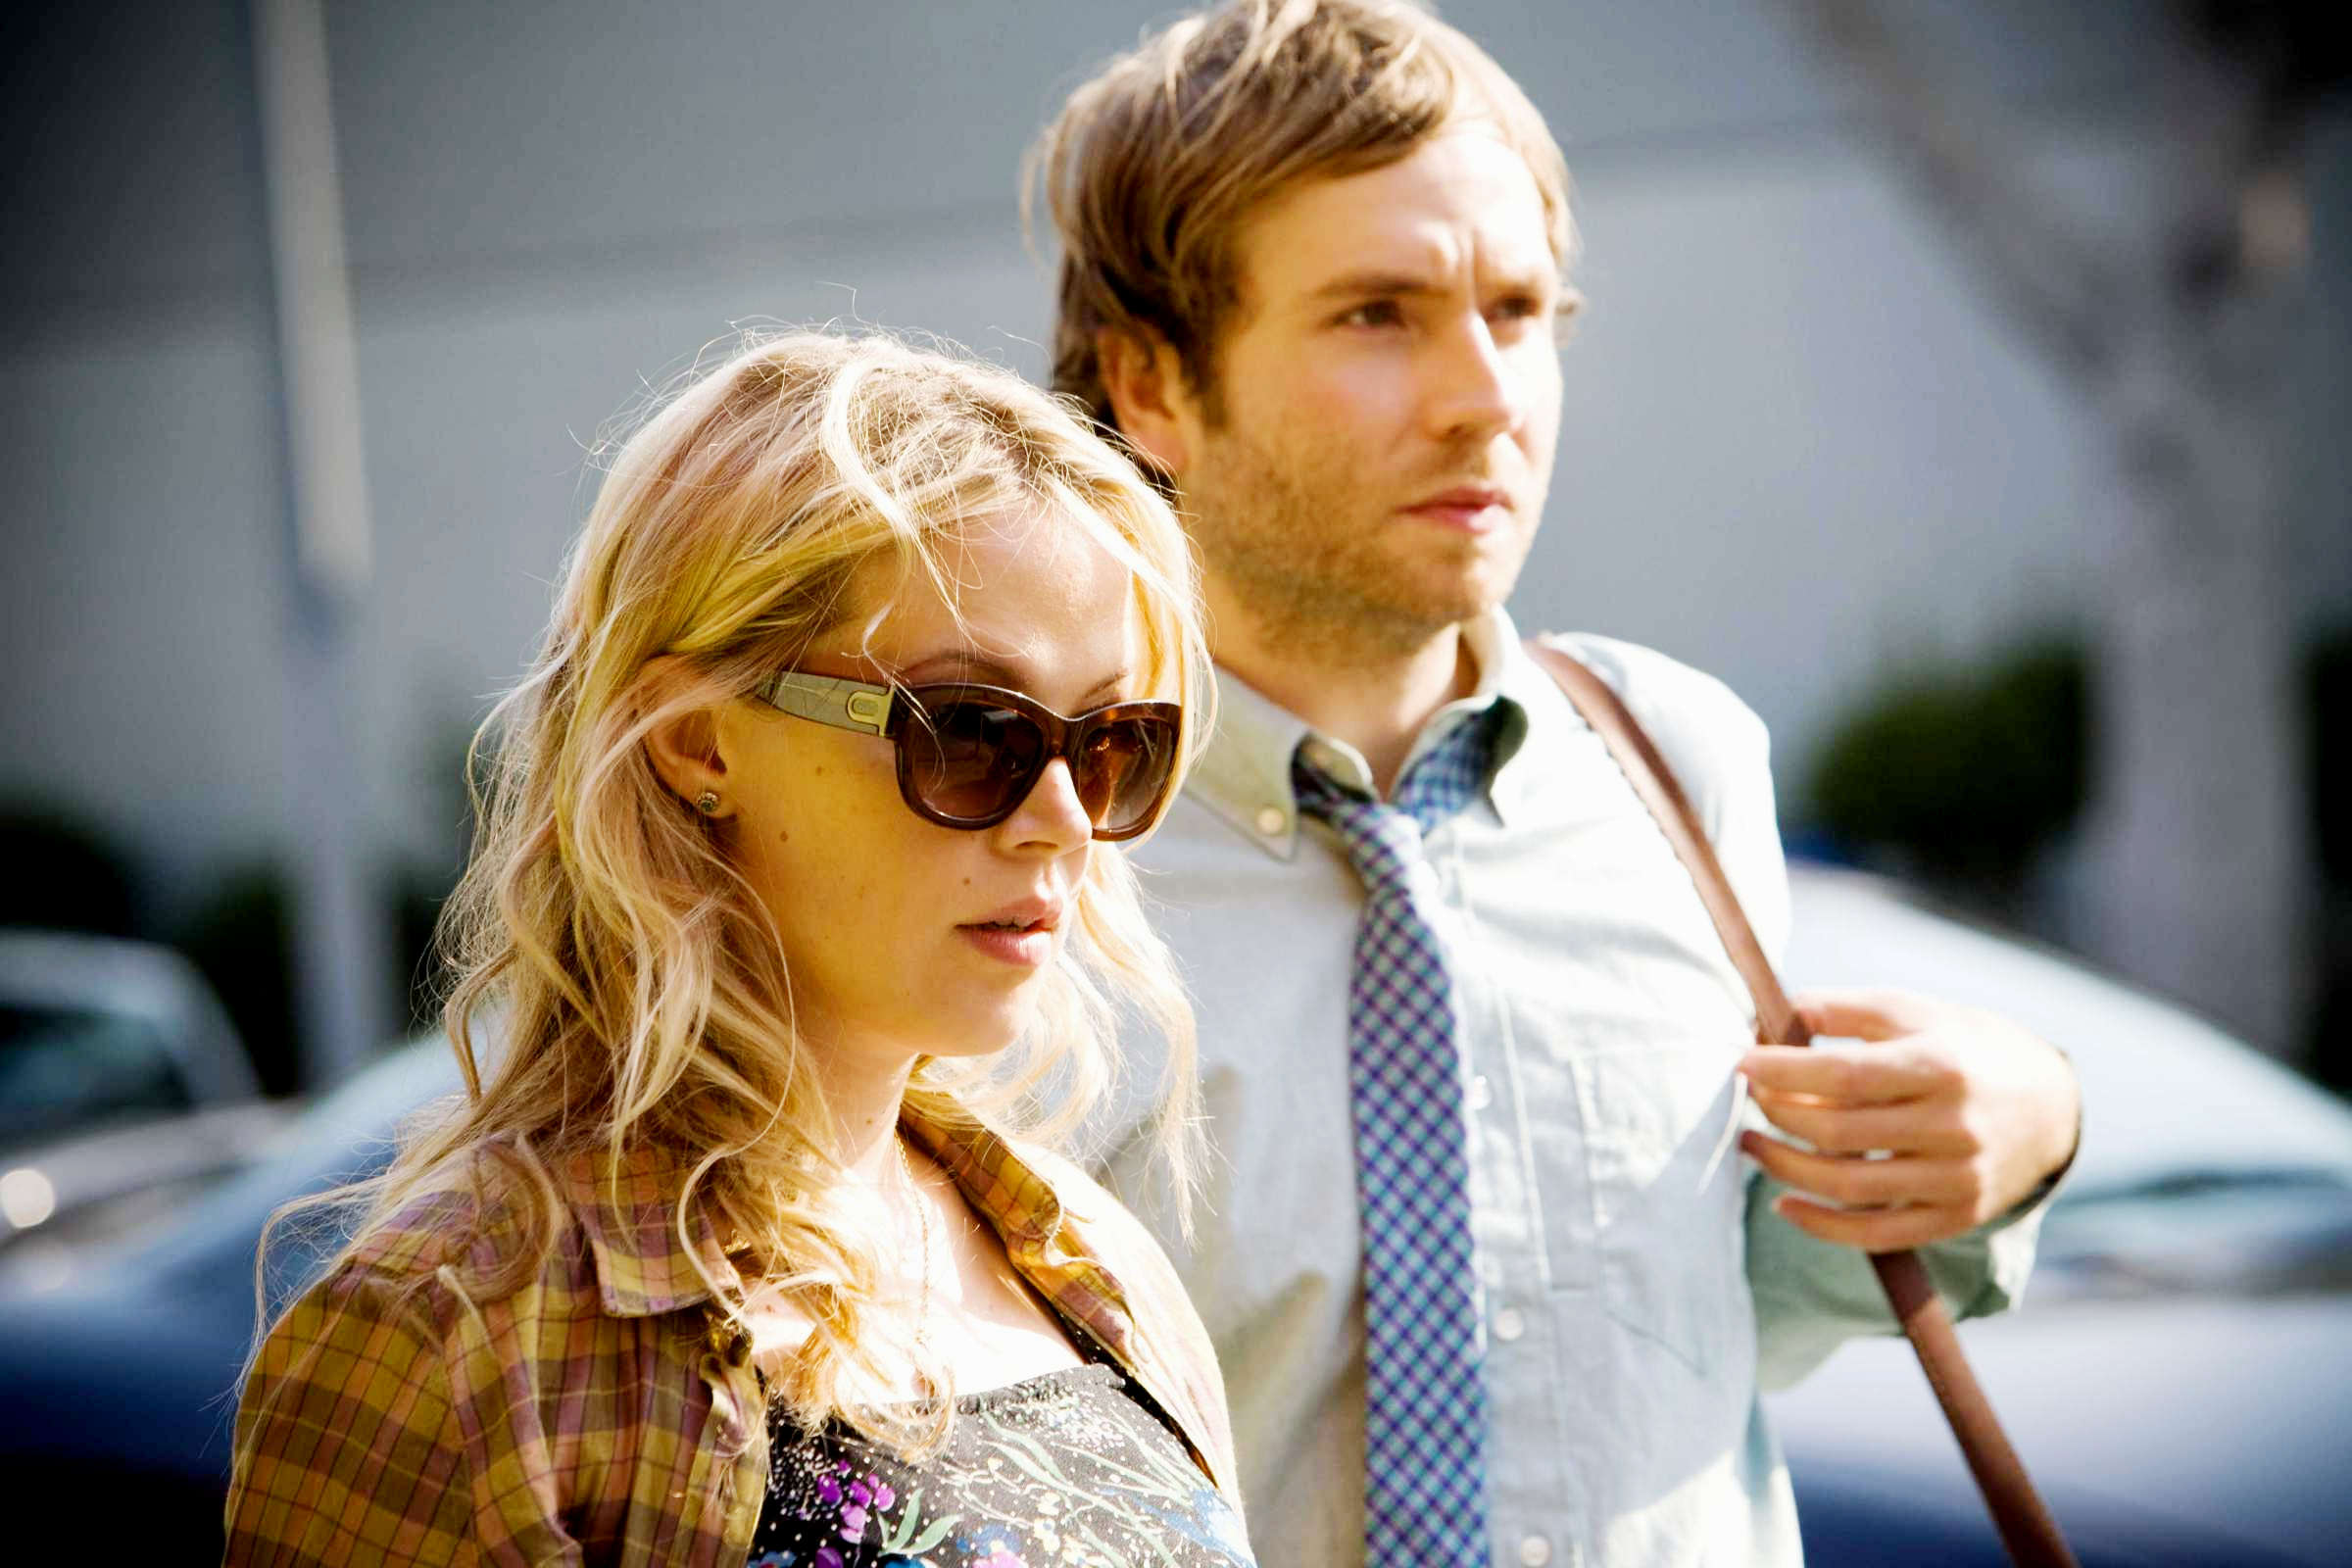 Pell James stars as Daisy and Mark Webber stars as Jeremy in Roadside Attractions' Shrink (2009). Photo credit by Jihan Abdalla.